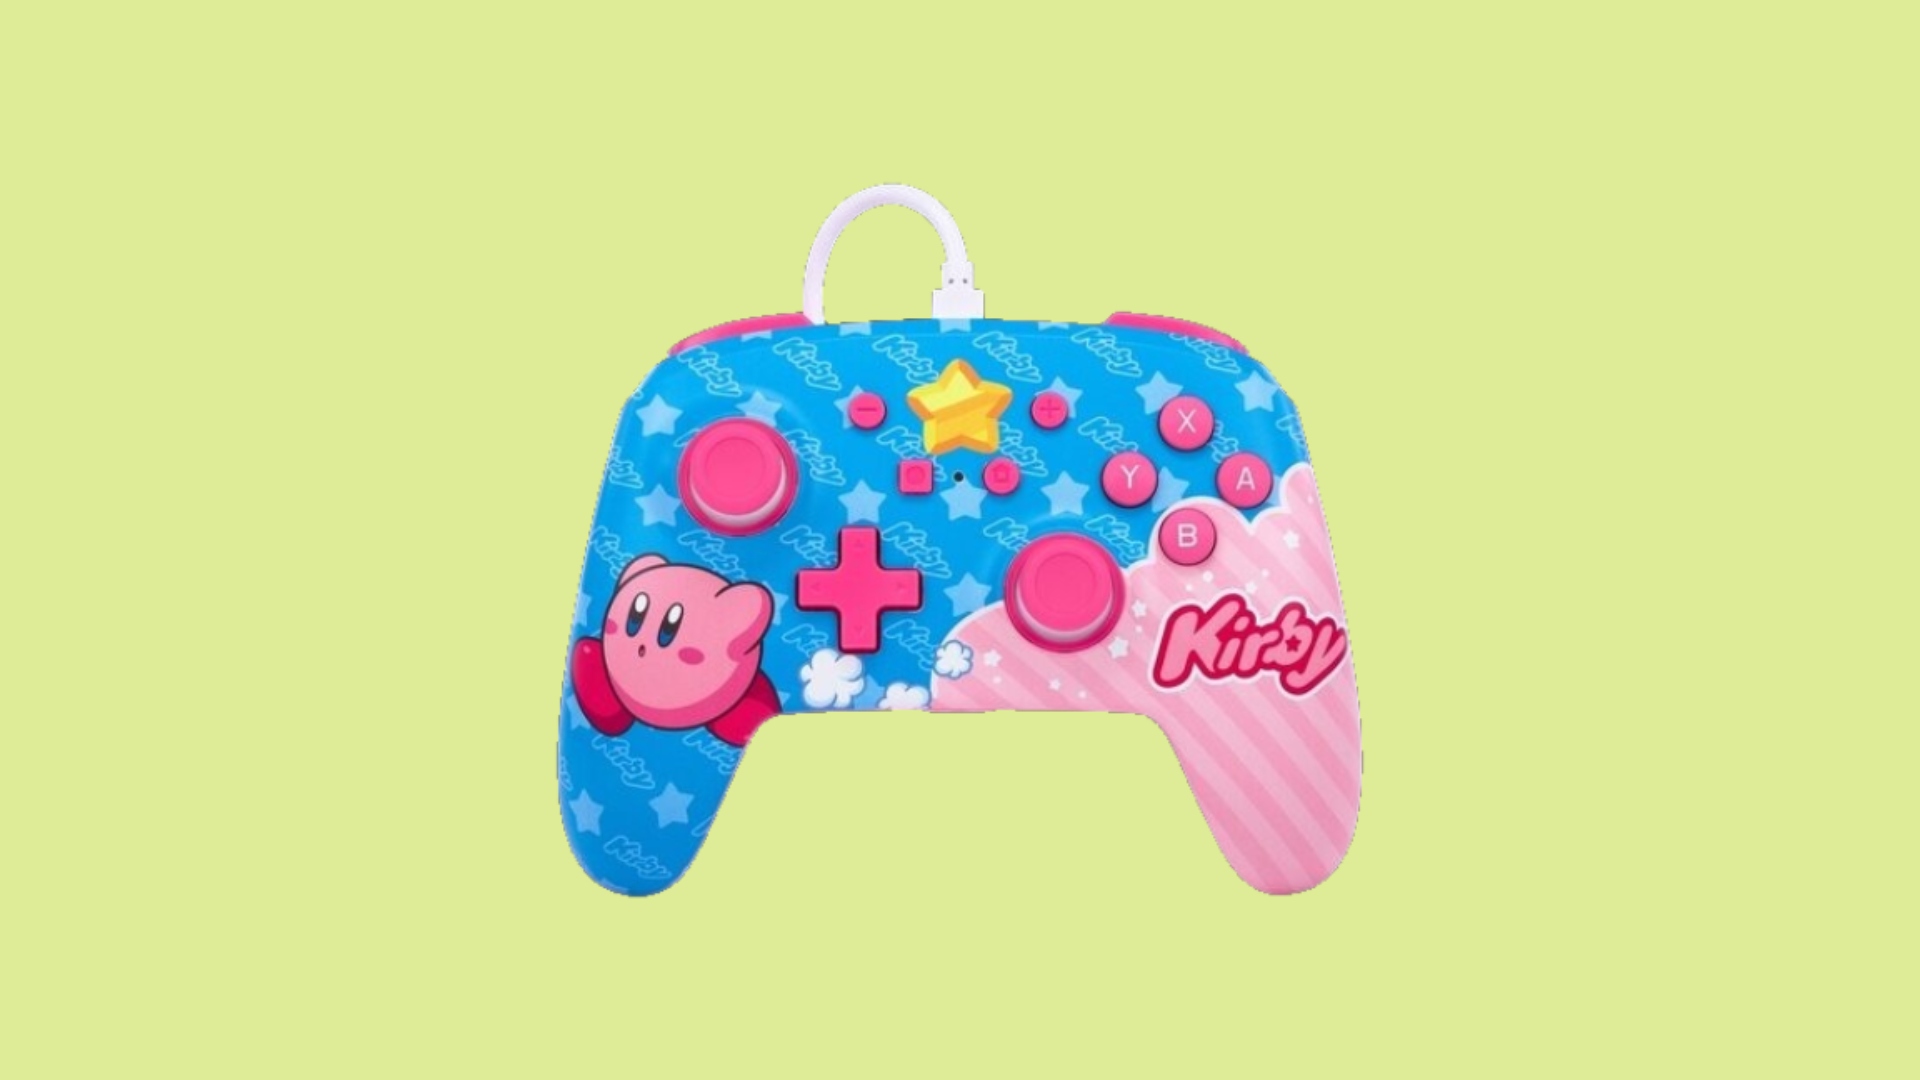 Best Nintendo Switch controllers - image shows a controller featuring Kirby artwork,